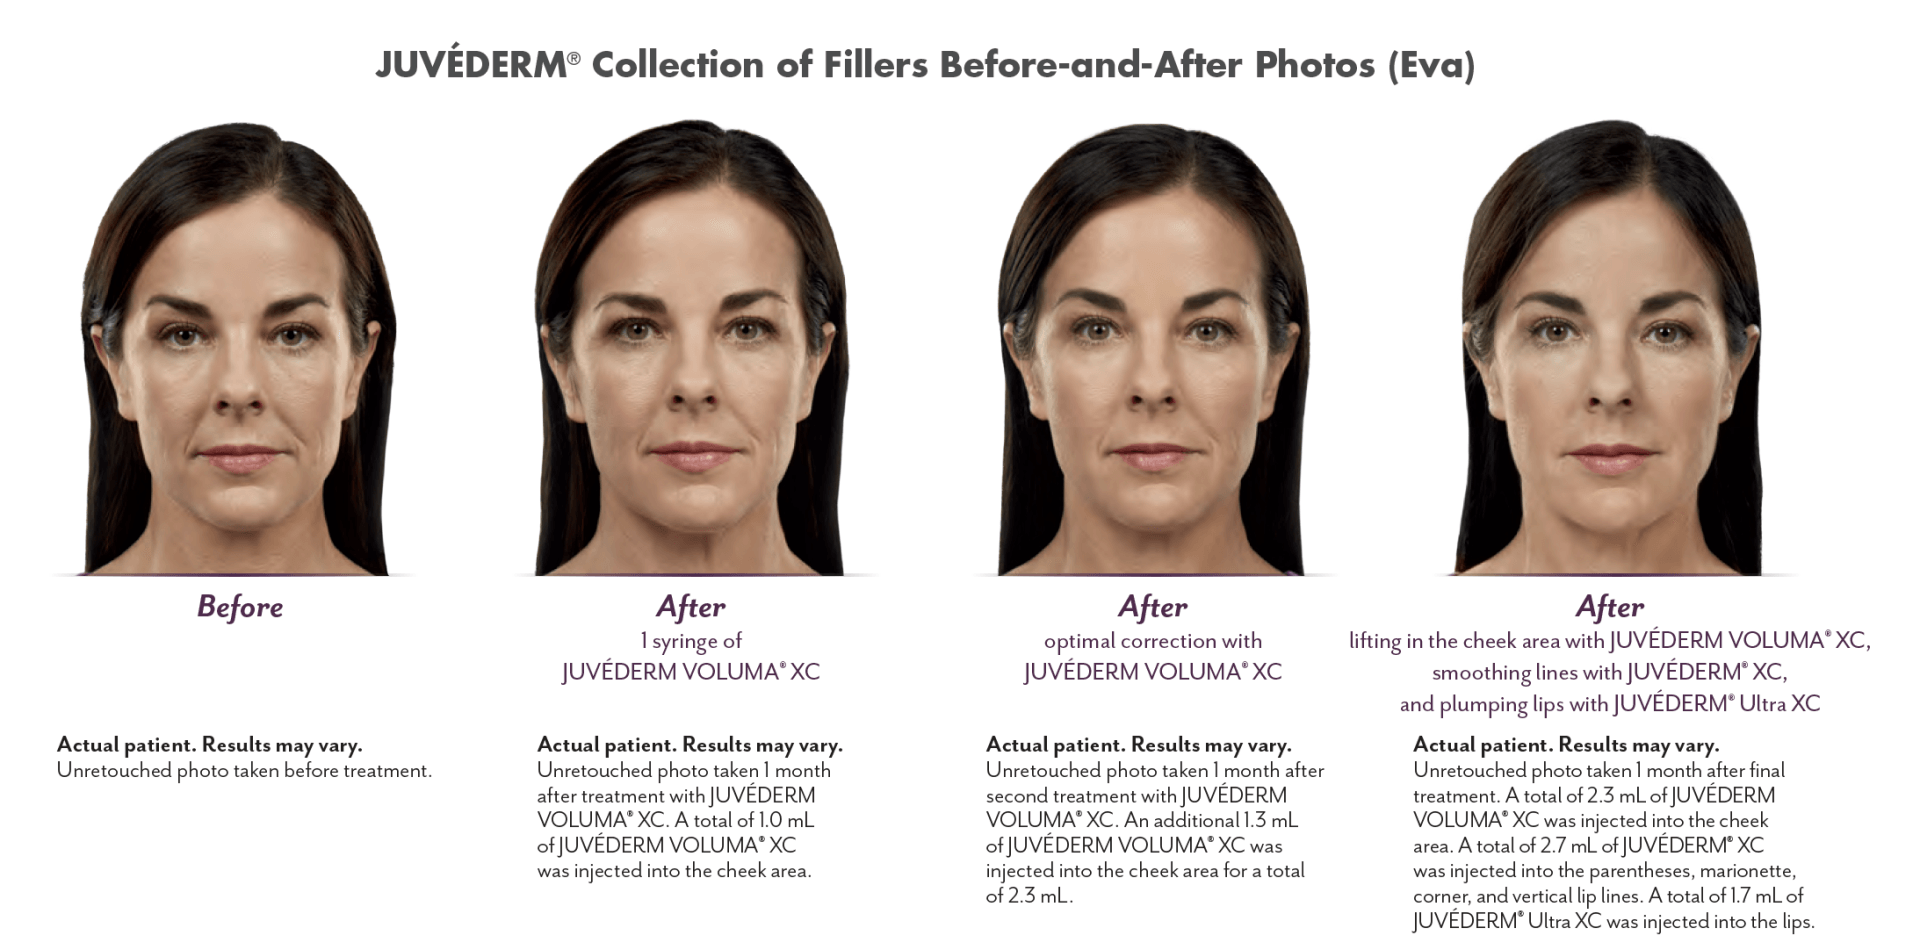 Juvéderm Collection of Fillers before and after photos